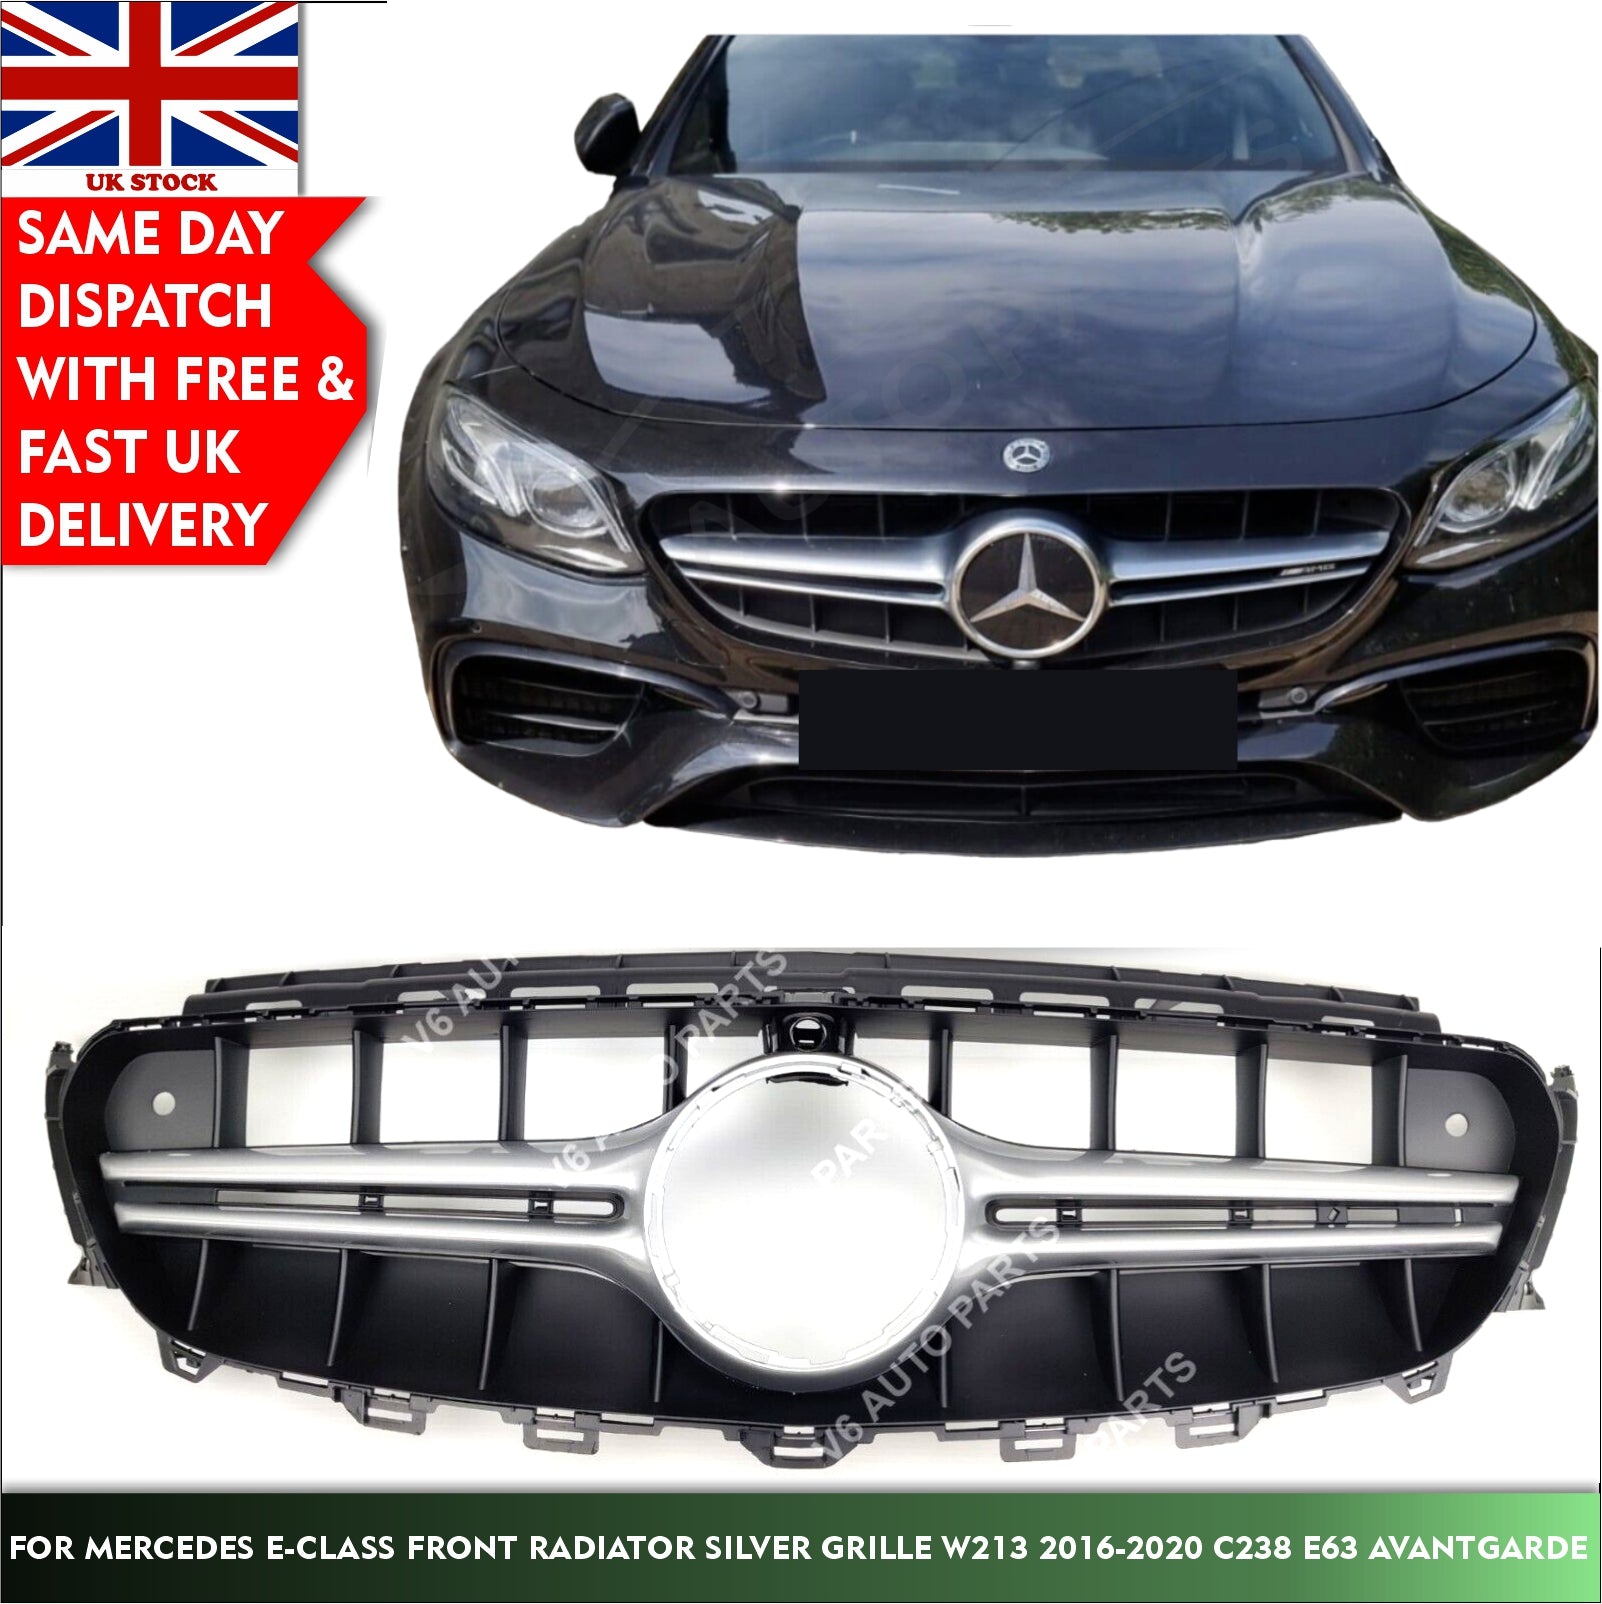 For Mercedes E-Class Grill W213 Front Radiator Grille 2016-20 C238 E220d AMG E53